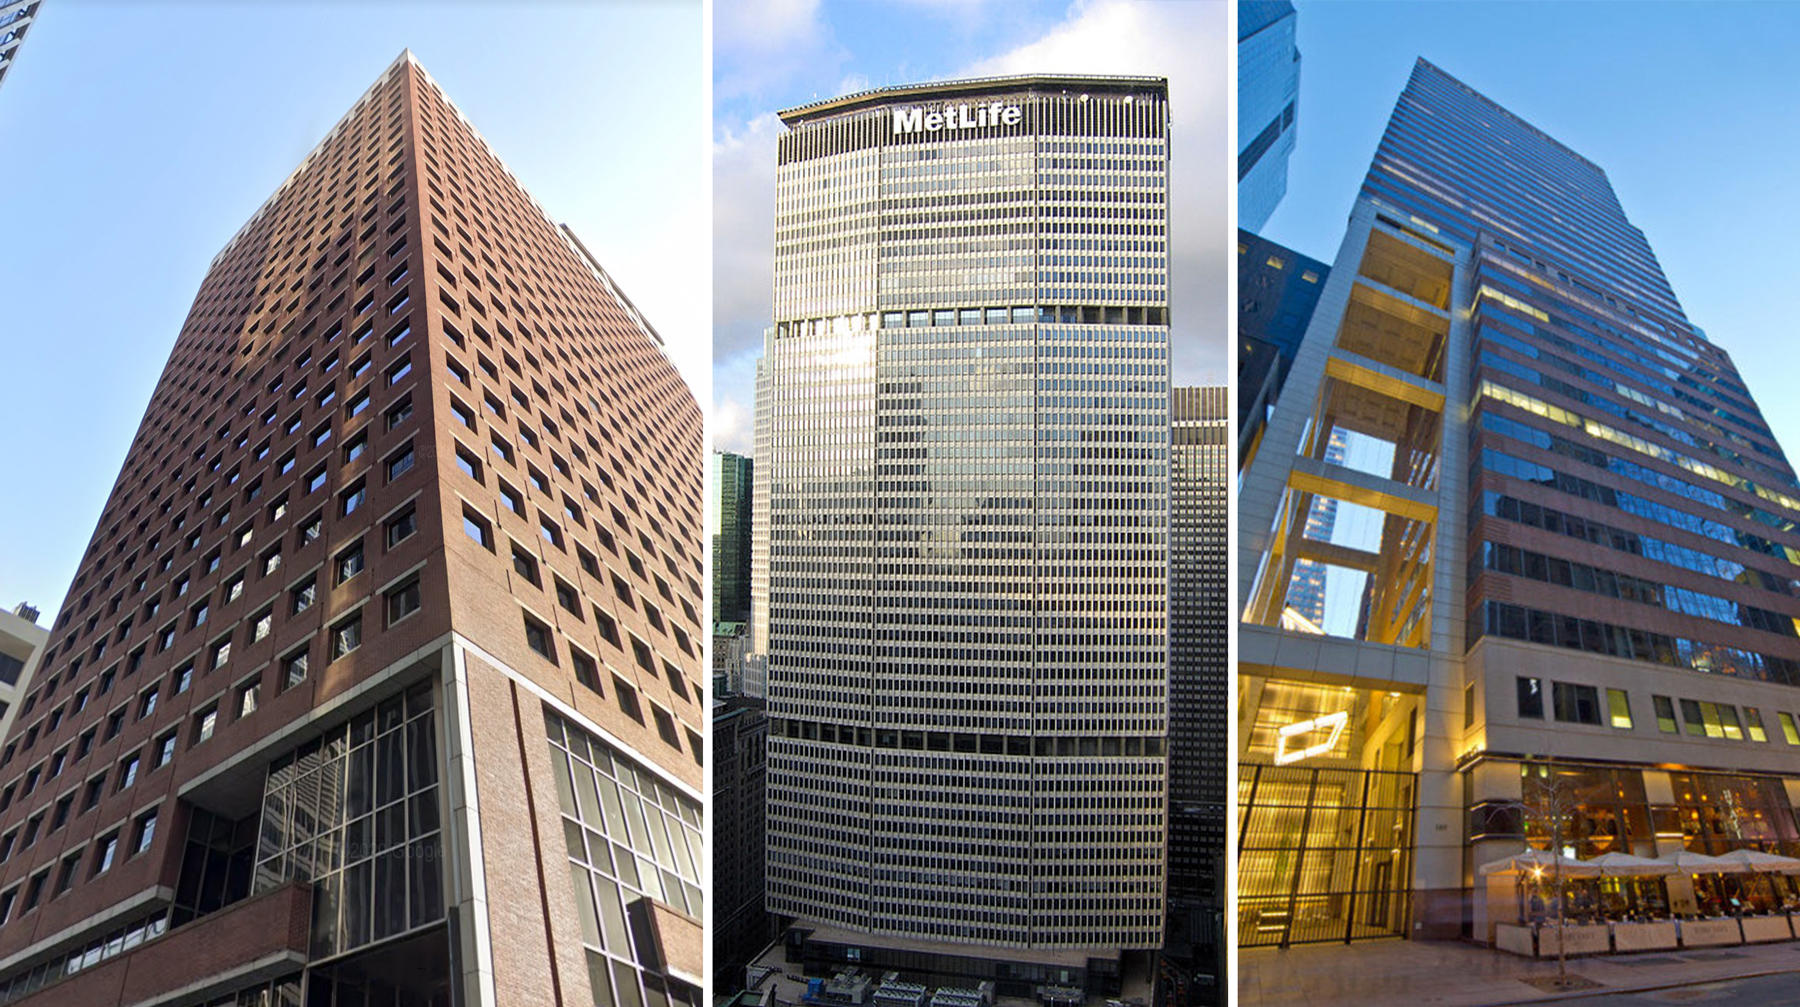 April’s top leases included a new 242,000-square-foot lease for the SEC at 100 Pearl Street, a 130,000-square-foot renewal for BNY Mellon at 200 Park Avenue, and a 78,000-square-foot renewal for D.E. Shaw & Co. L.P. at 120 West 45th Street (Credit: Google Maps; Postdlf via Wikipedia; Tower 45)